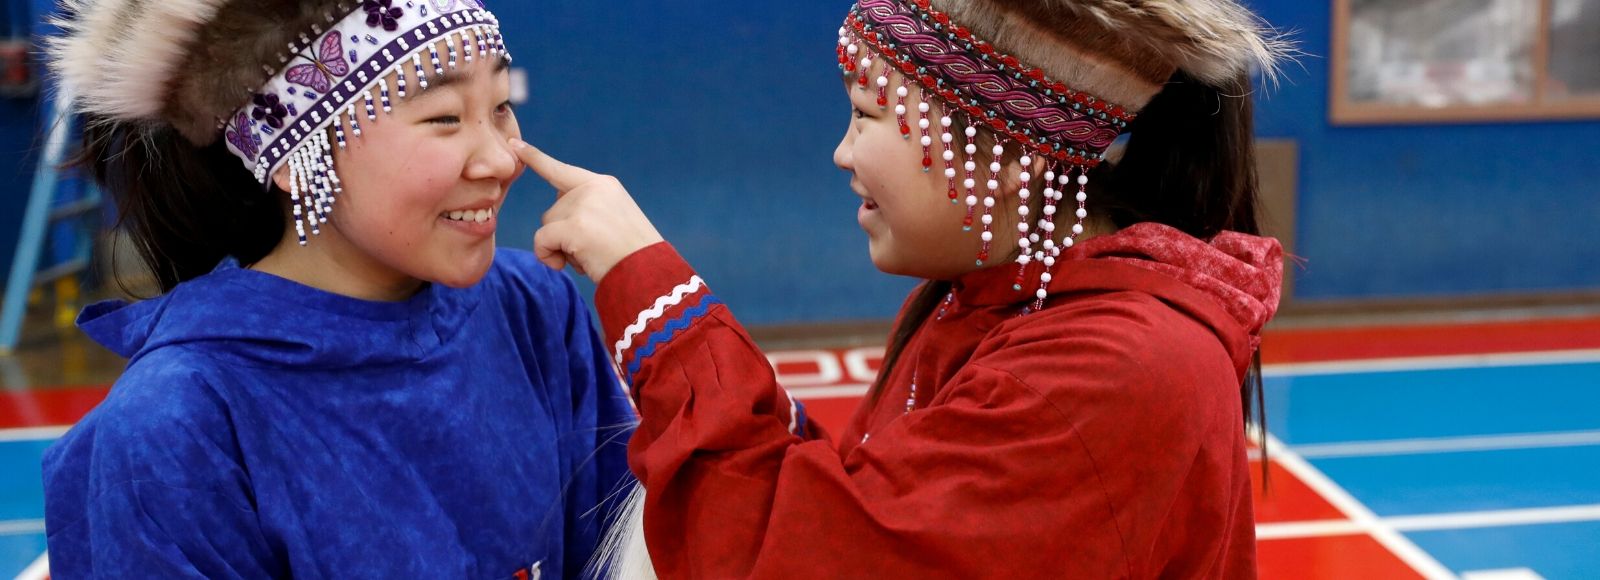 Alaska Native girls prepare to dance in honor of the beginning of the 2020 Census in rural Alaska. The Census count begins in this state out of necessity and tradition